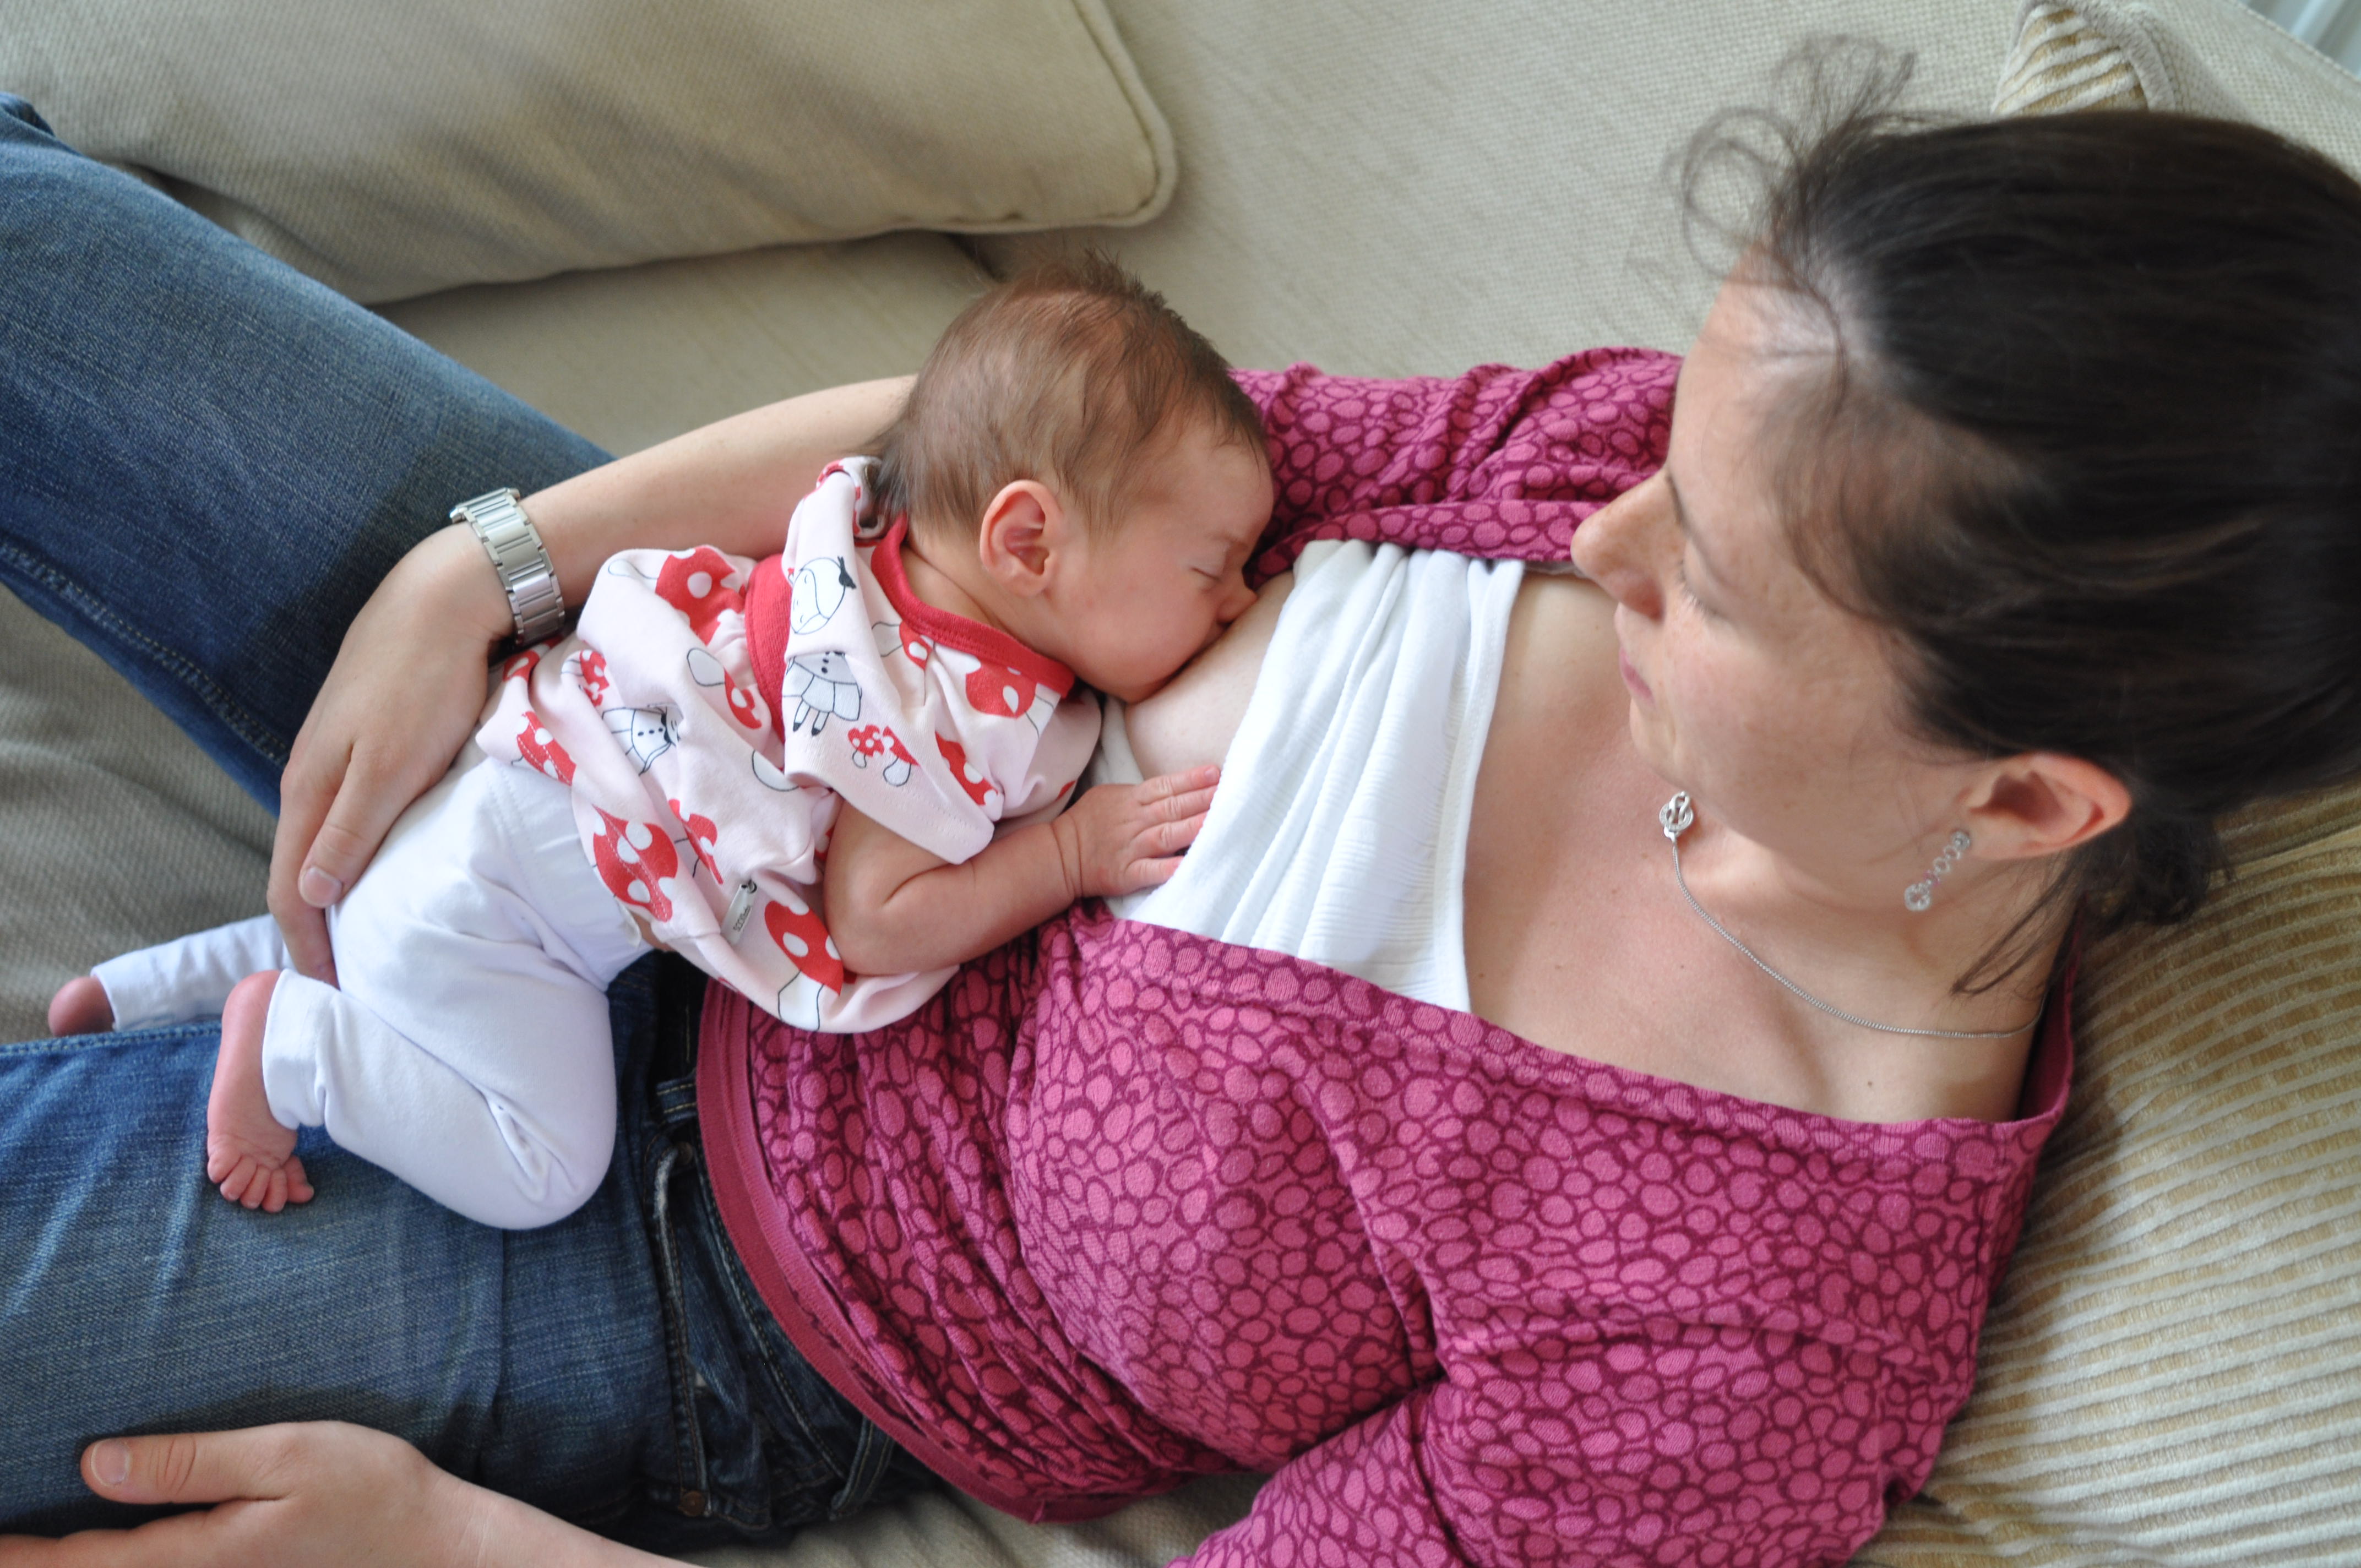 Yes, you can breastfeed with large breasts